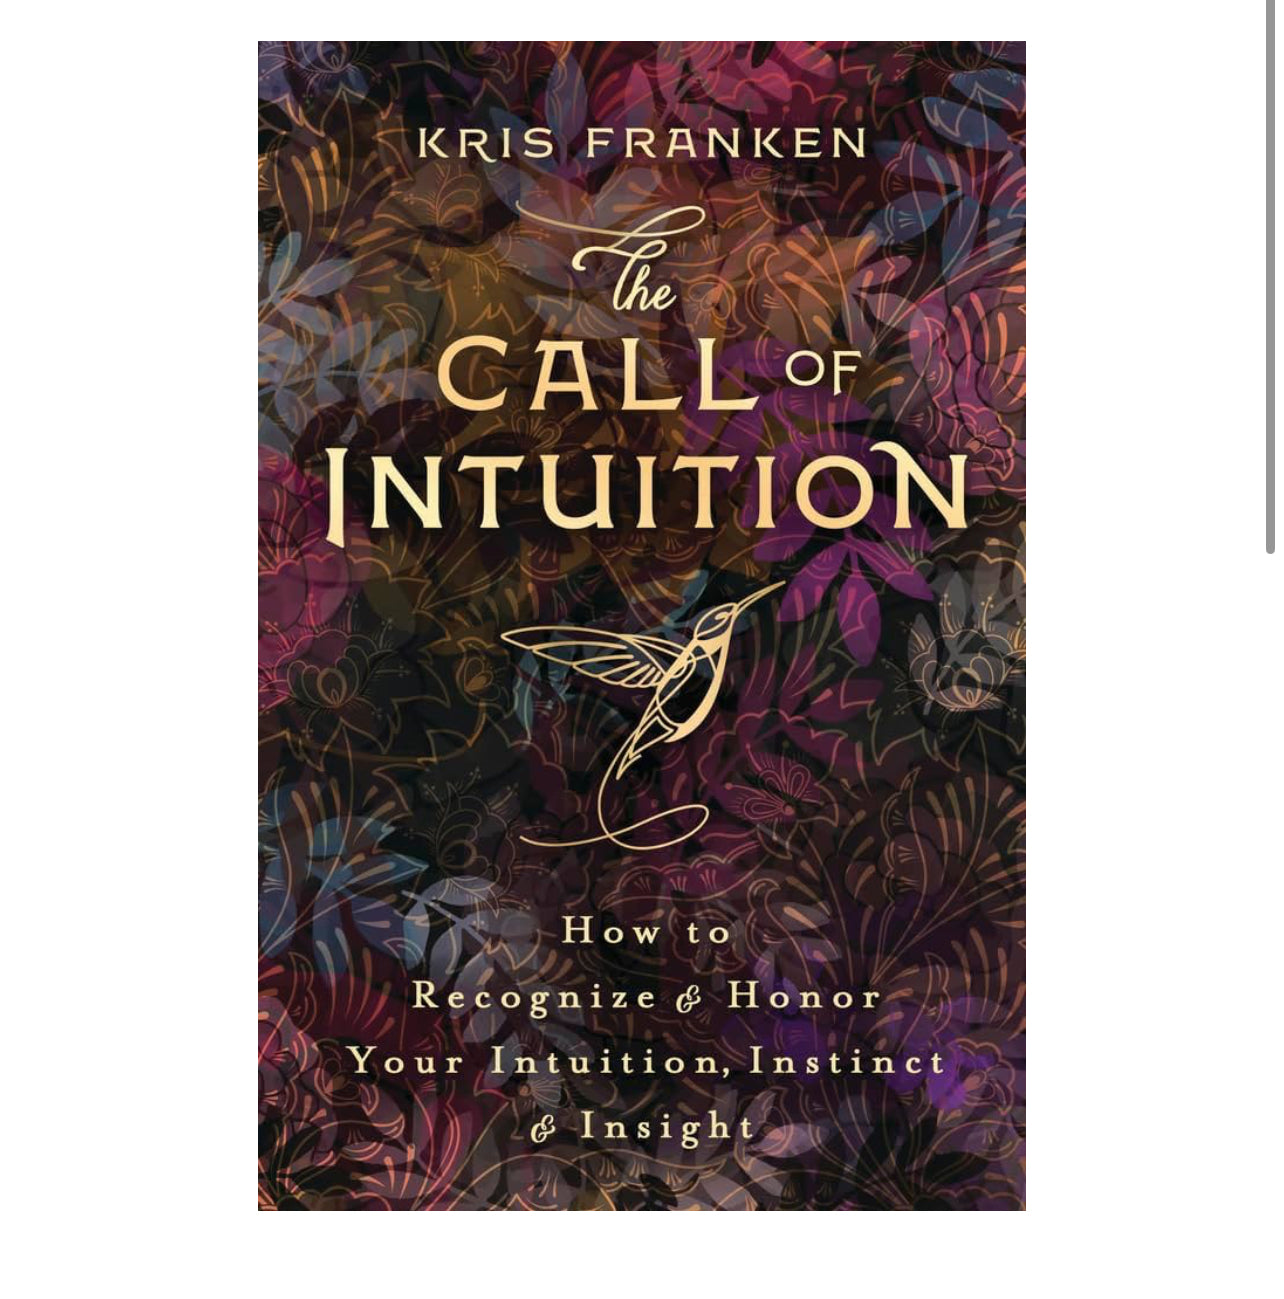 The Call of Intuition: How to Recognize & Honor Your Intuition, Instinct & Insight